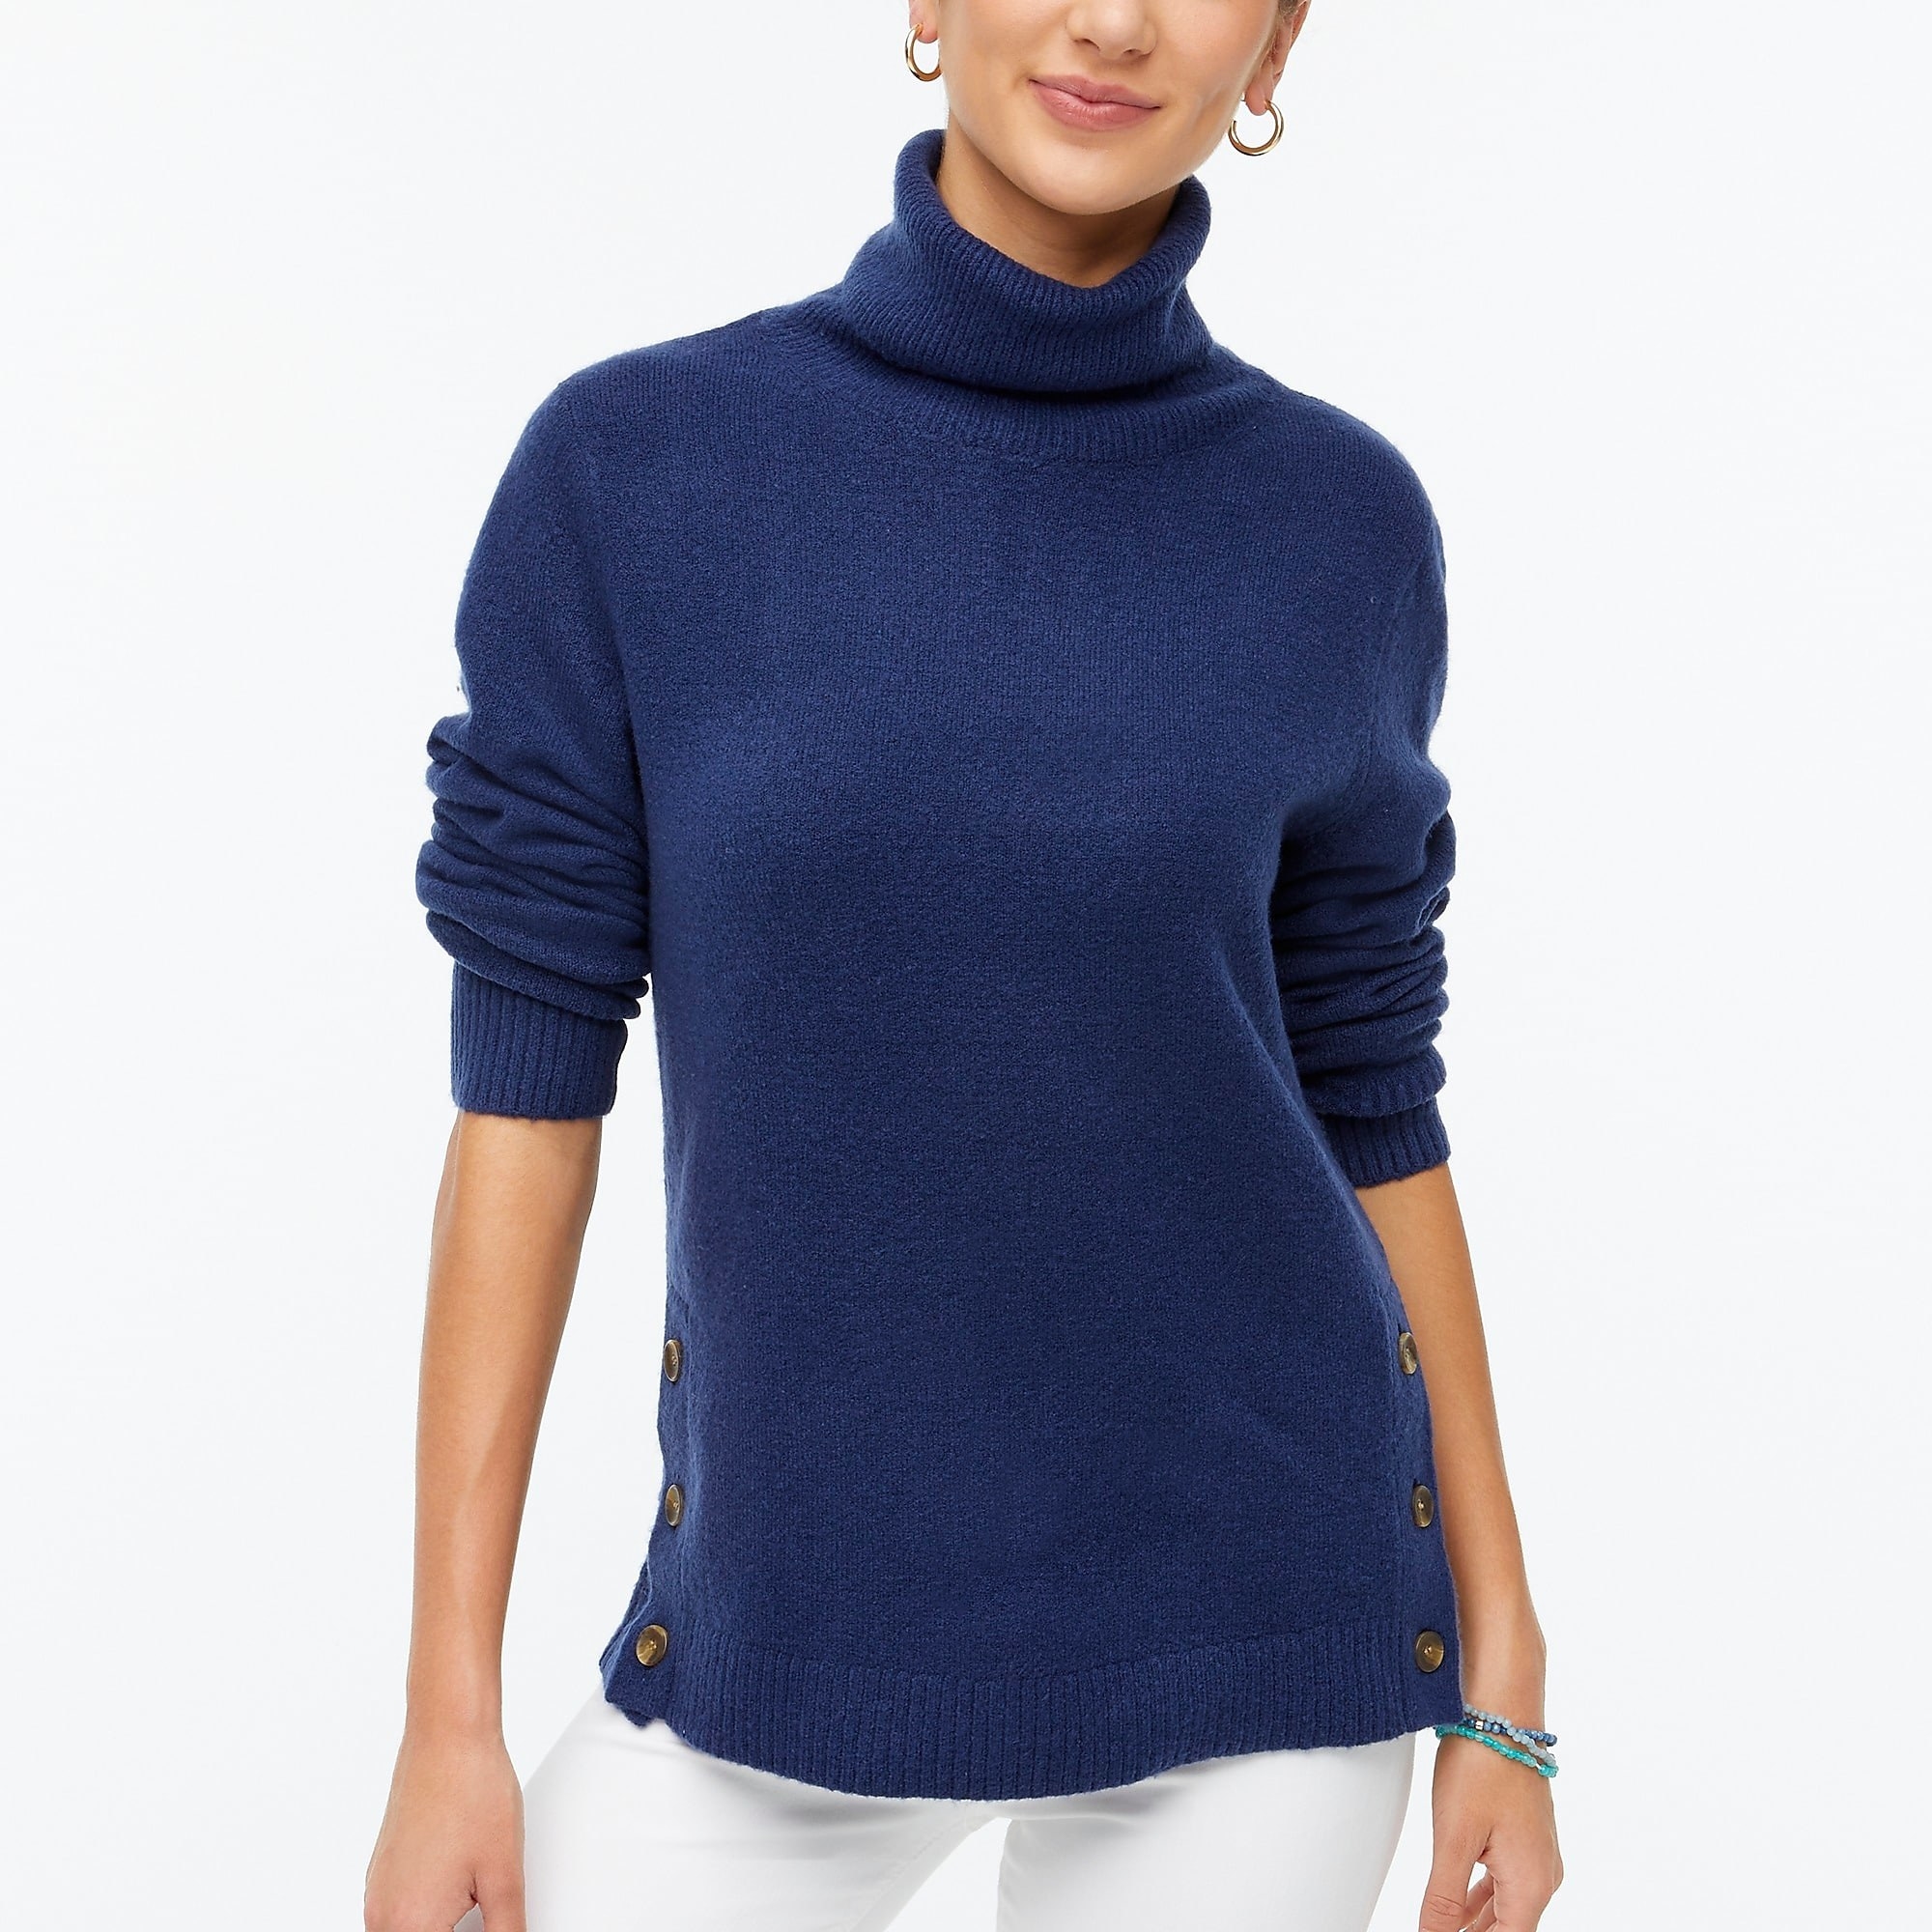 Model wearing a blue turtleneck with button detailing